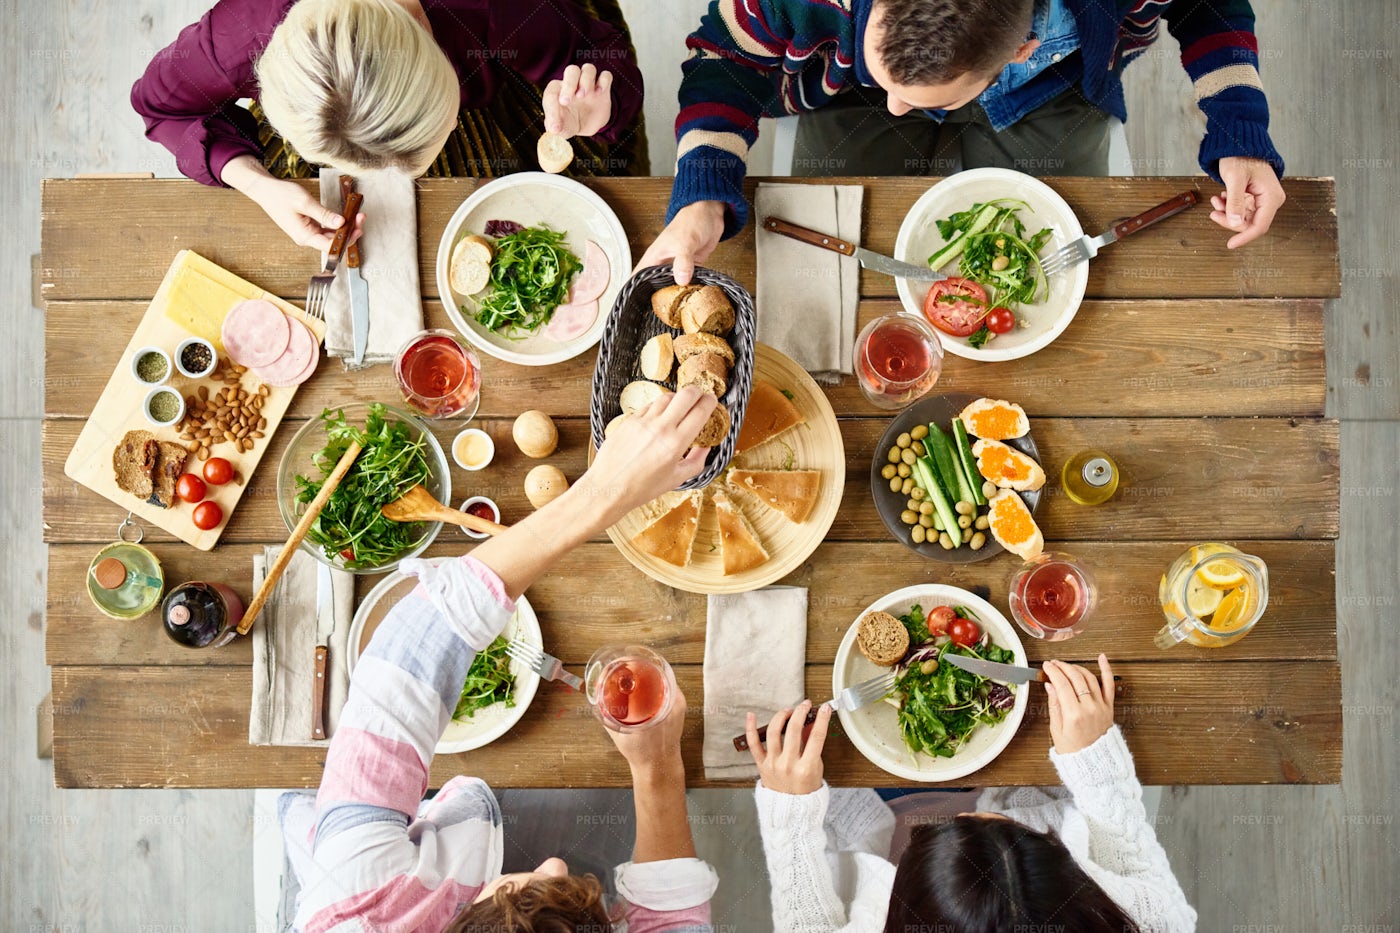 Friends Eating At Dinner Table - Stock Photos | Motion Array